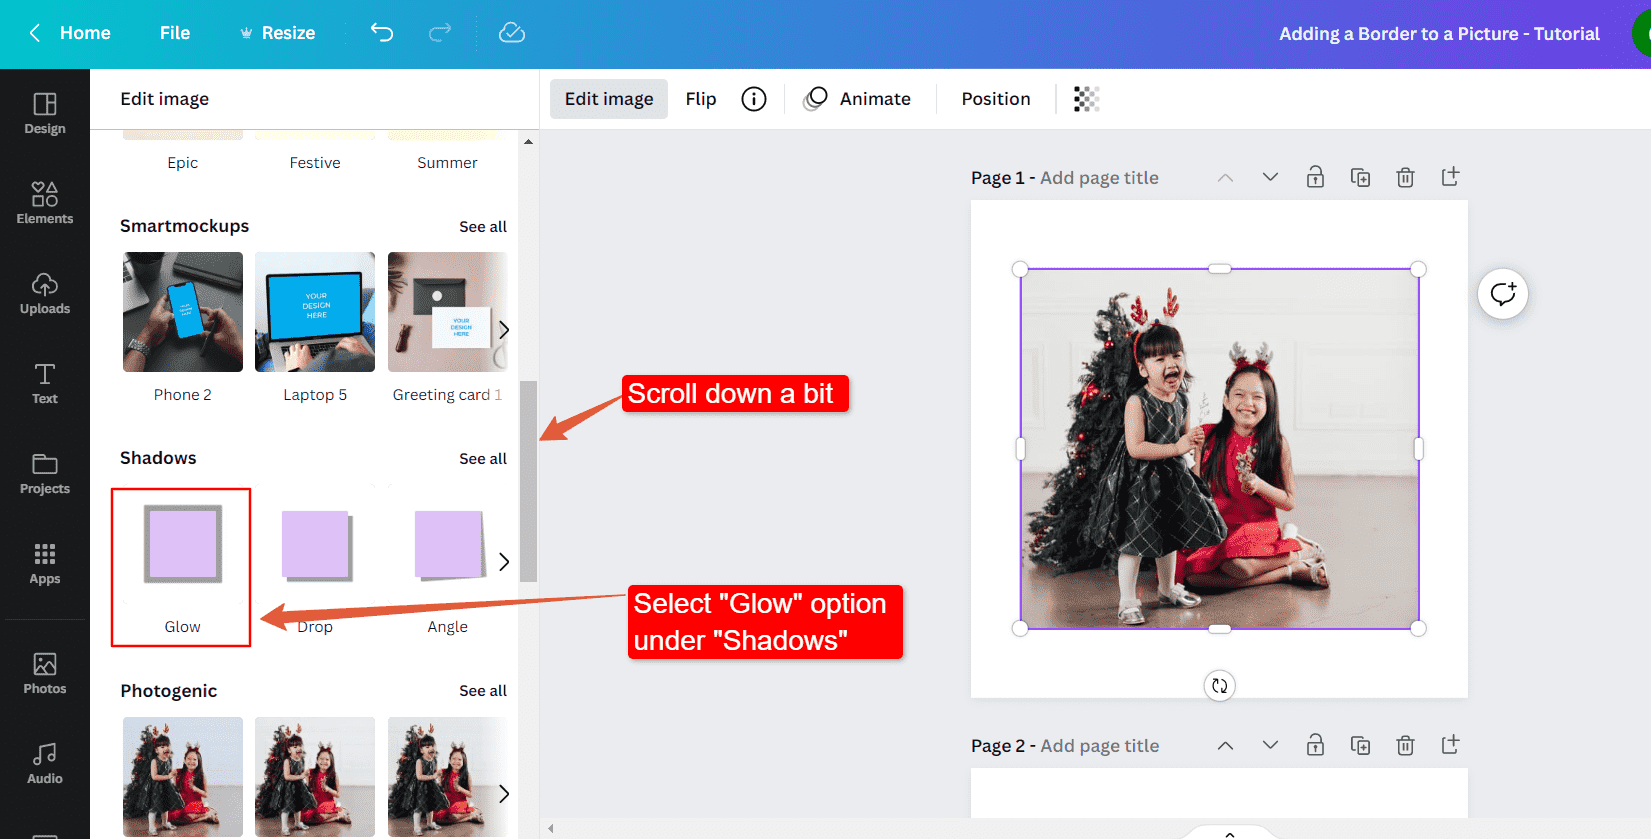 how to add a border to an image in canva